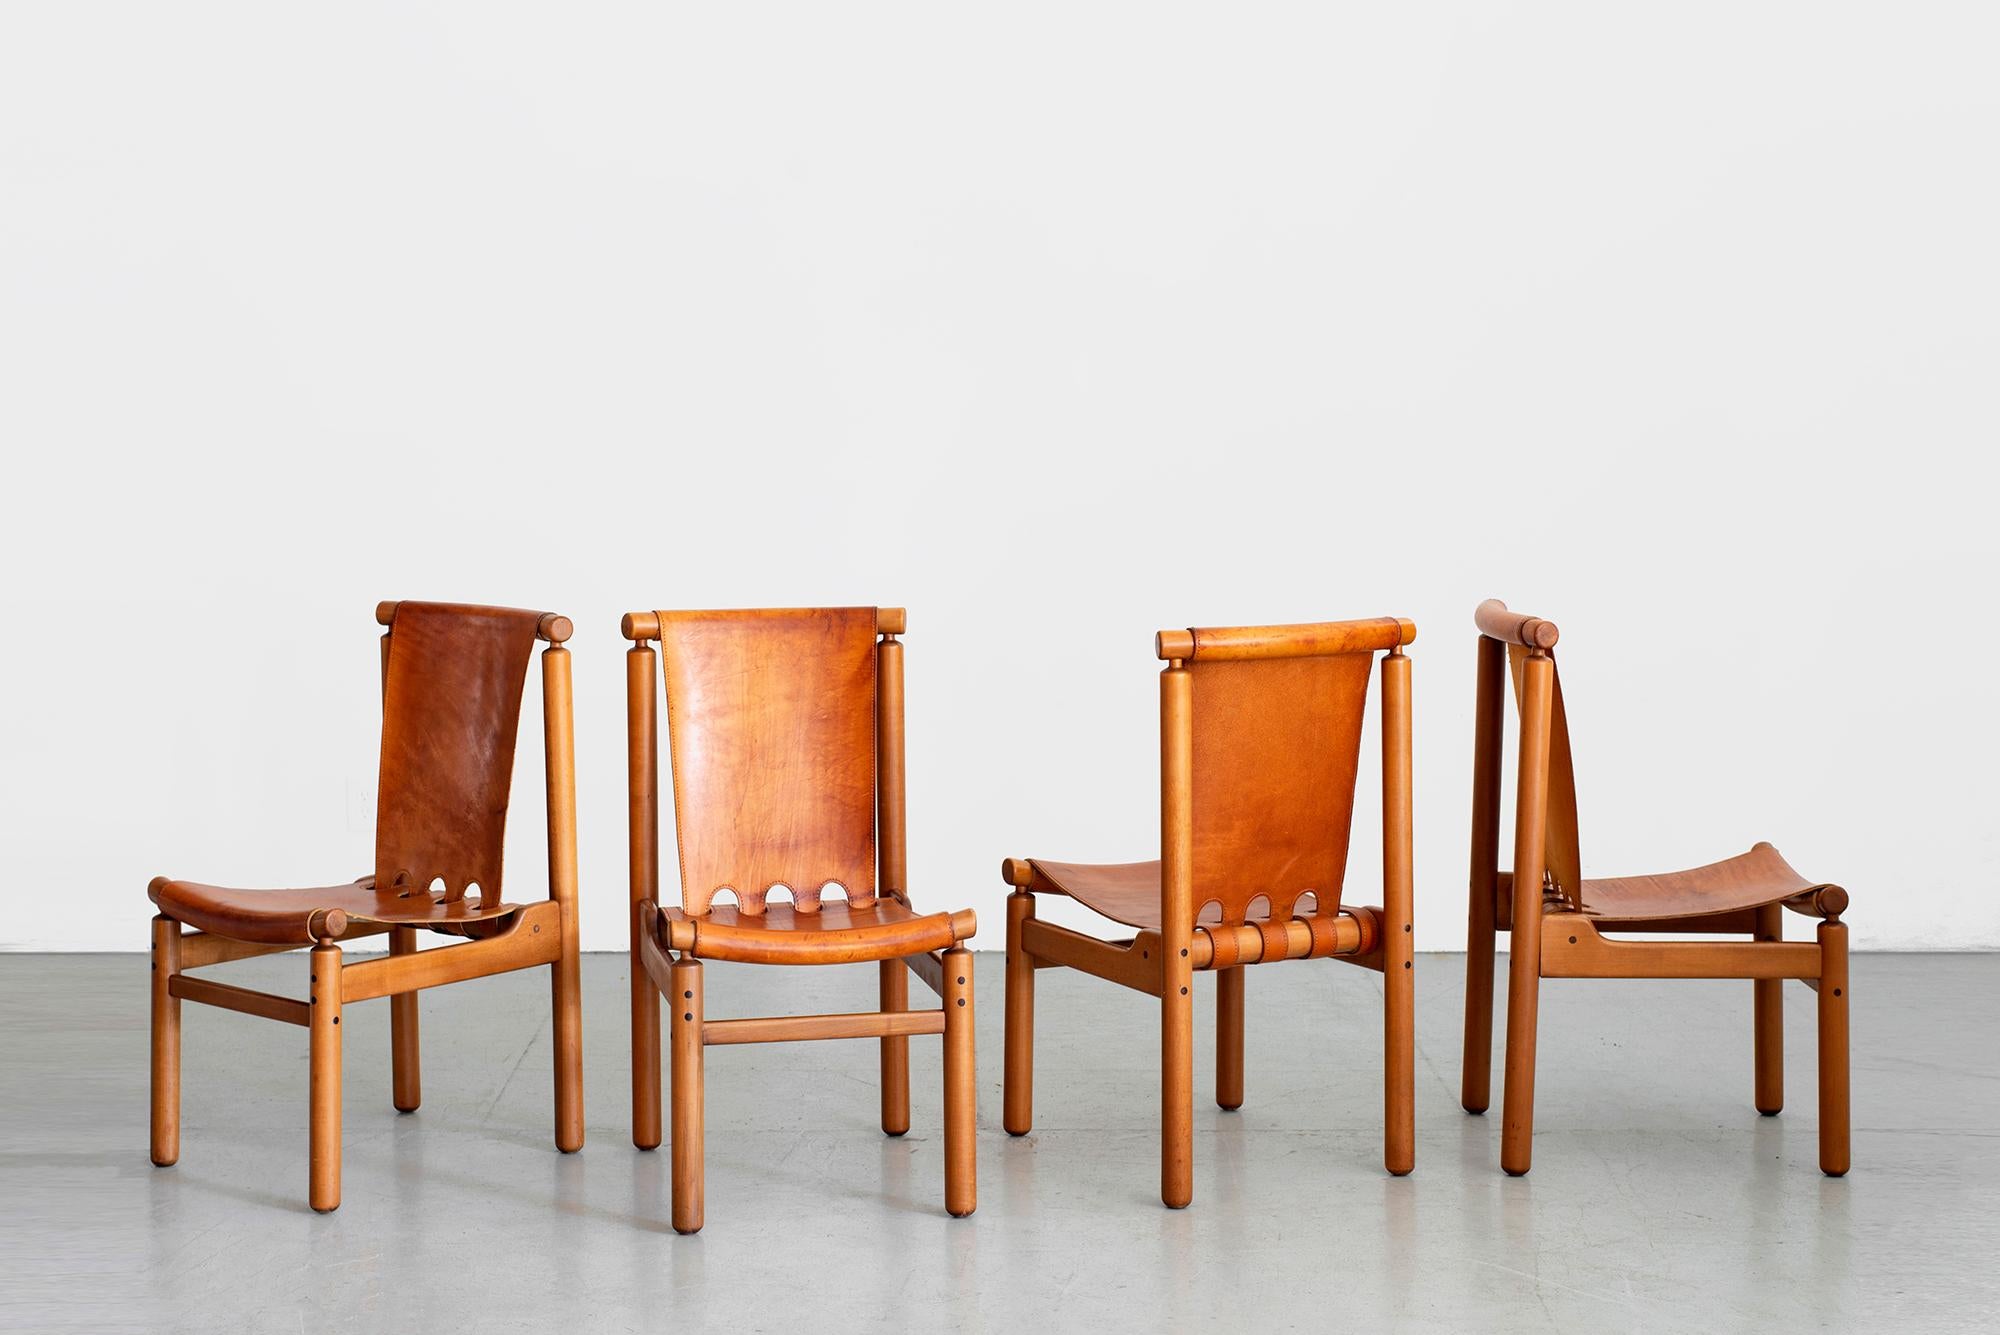 Incredible set of 4 leather Italian dining chairs by Ilmari Tapiovaara for La Permanente Mobili Cantù, circa 1950s.
Wonderful thick saddle leather with great patina'd leather on solid wood frames.
 